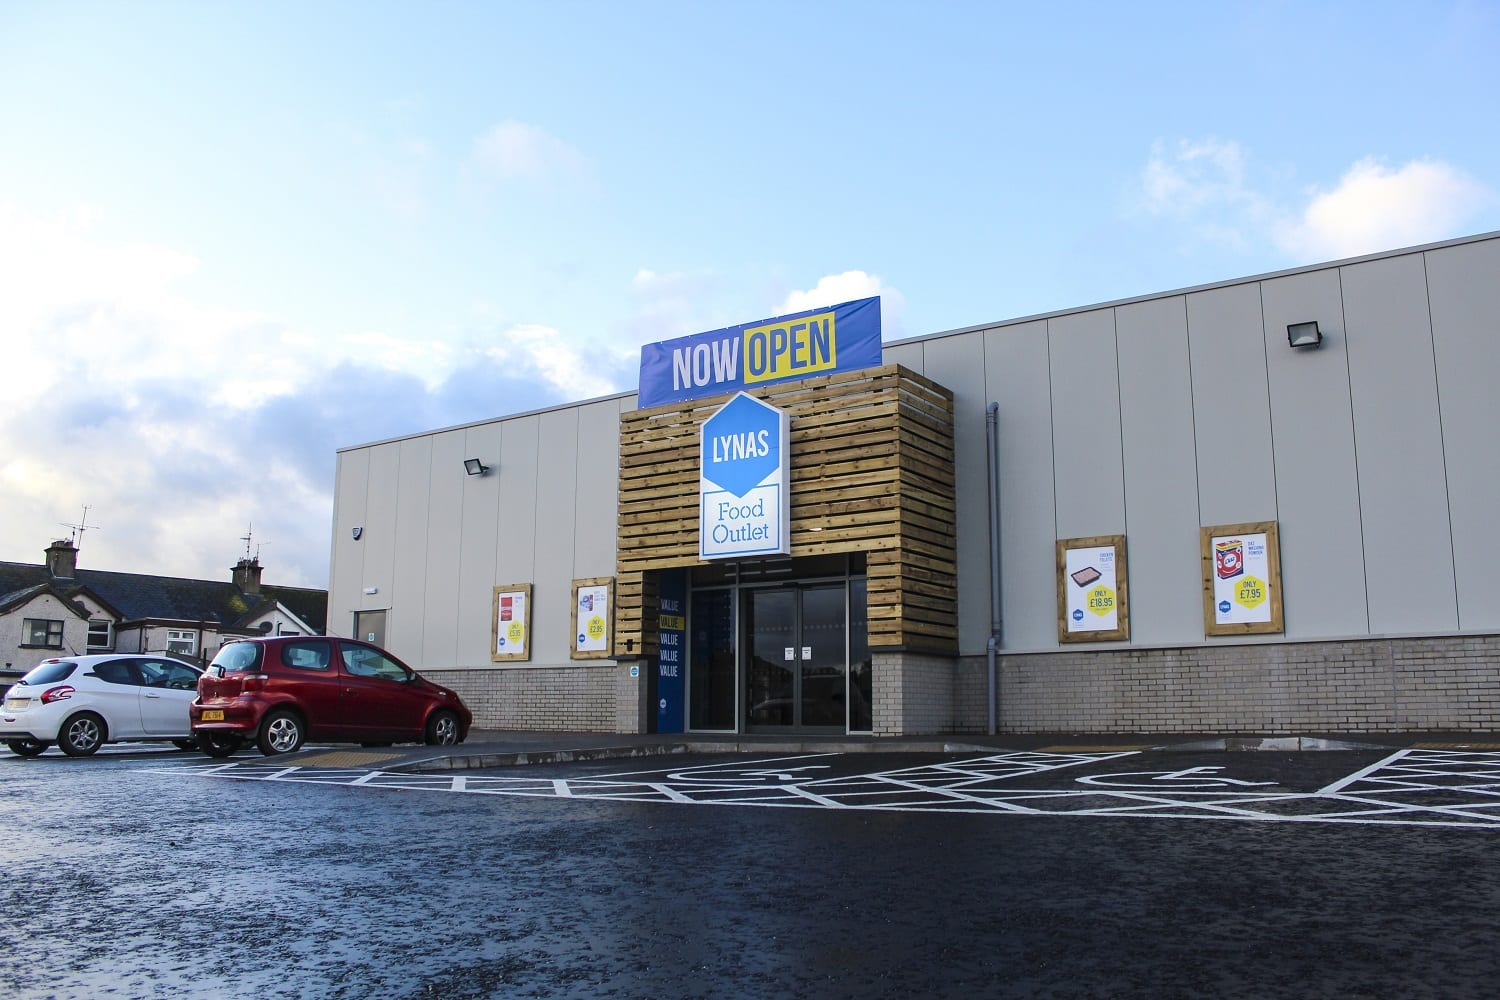 Lynas plans new Outlet site for Cookstown